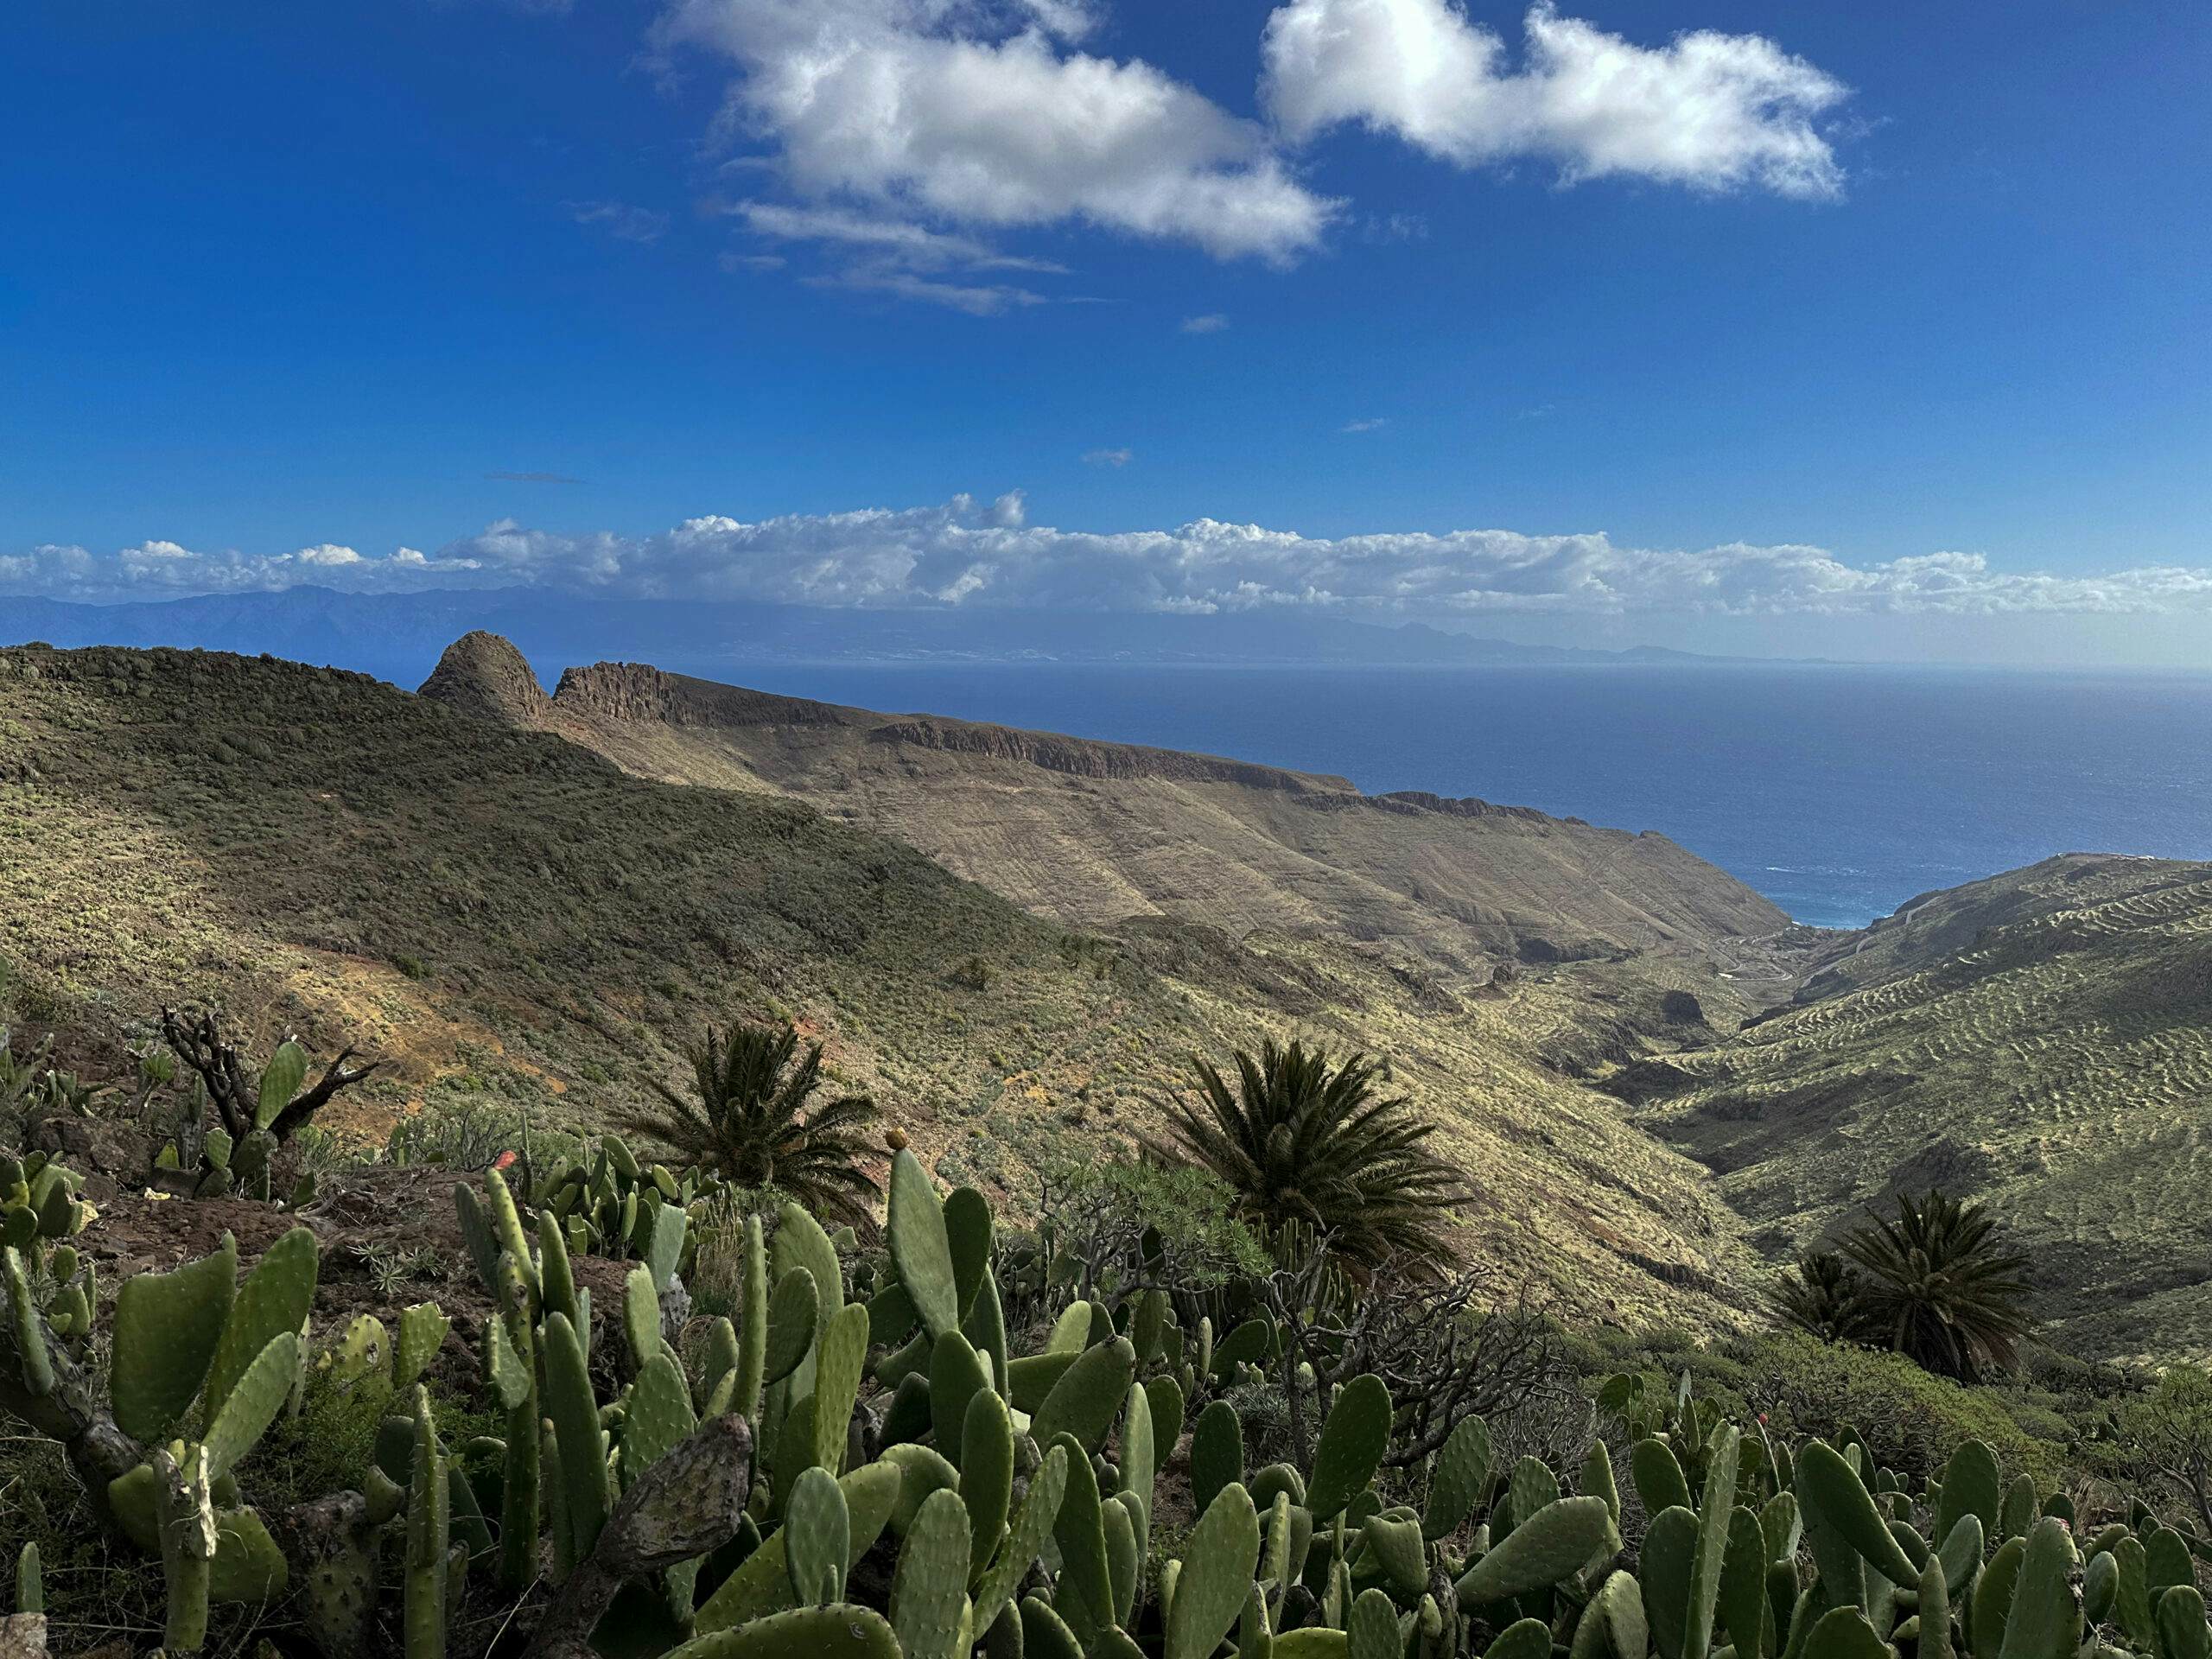 View from the hiking trail on the ridge over to Tenerife and down through the gorges to the Atlantic Ocean